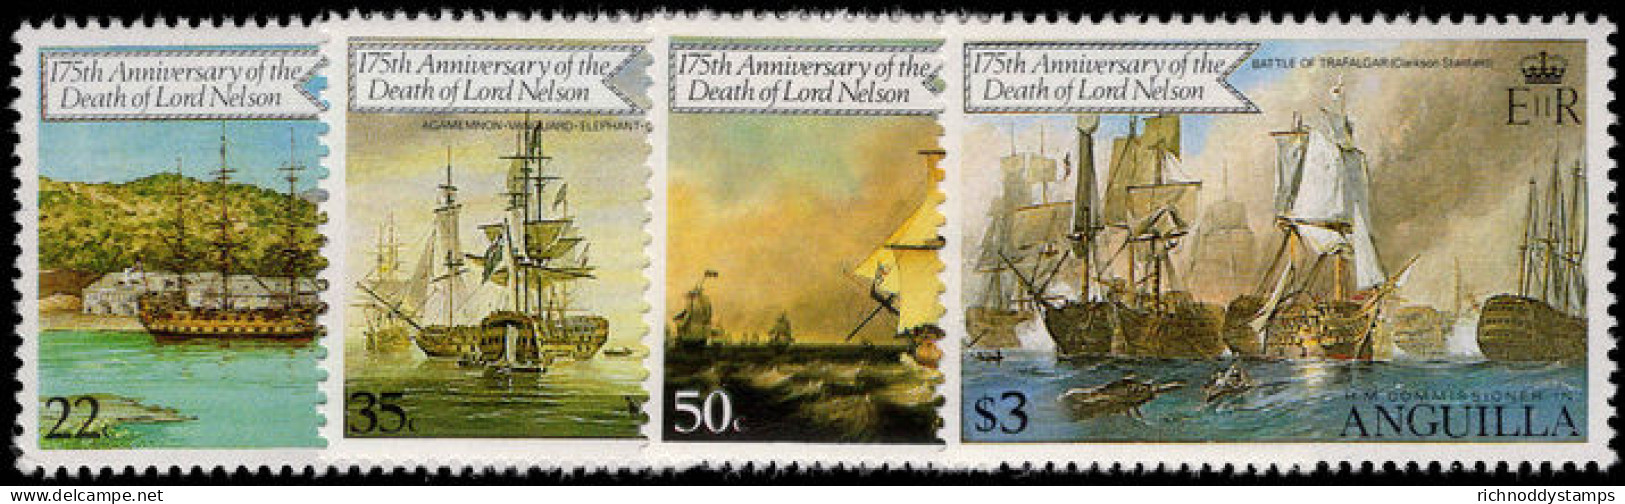 Anguilla 1981 Lord Nelson Unmounted Mint. - Anguilla (1968-...)